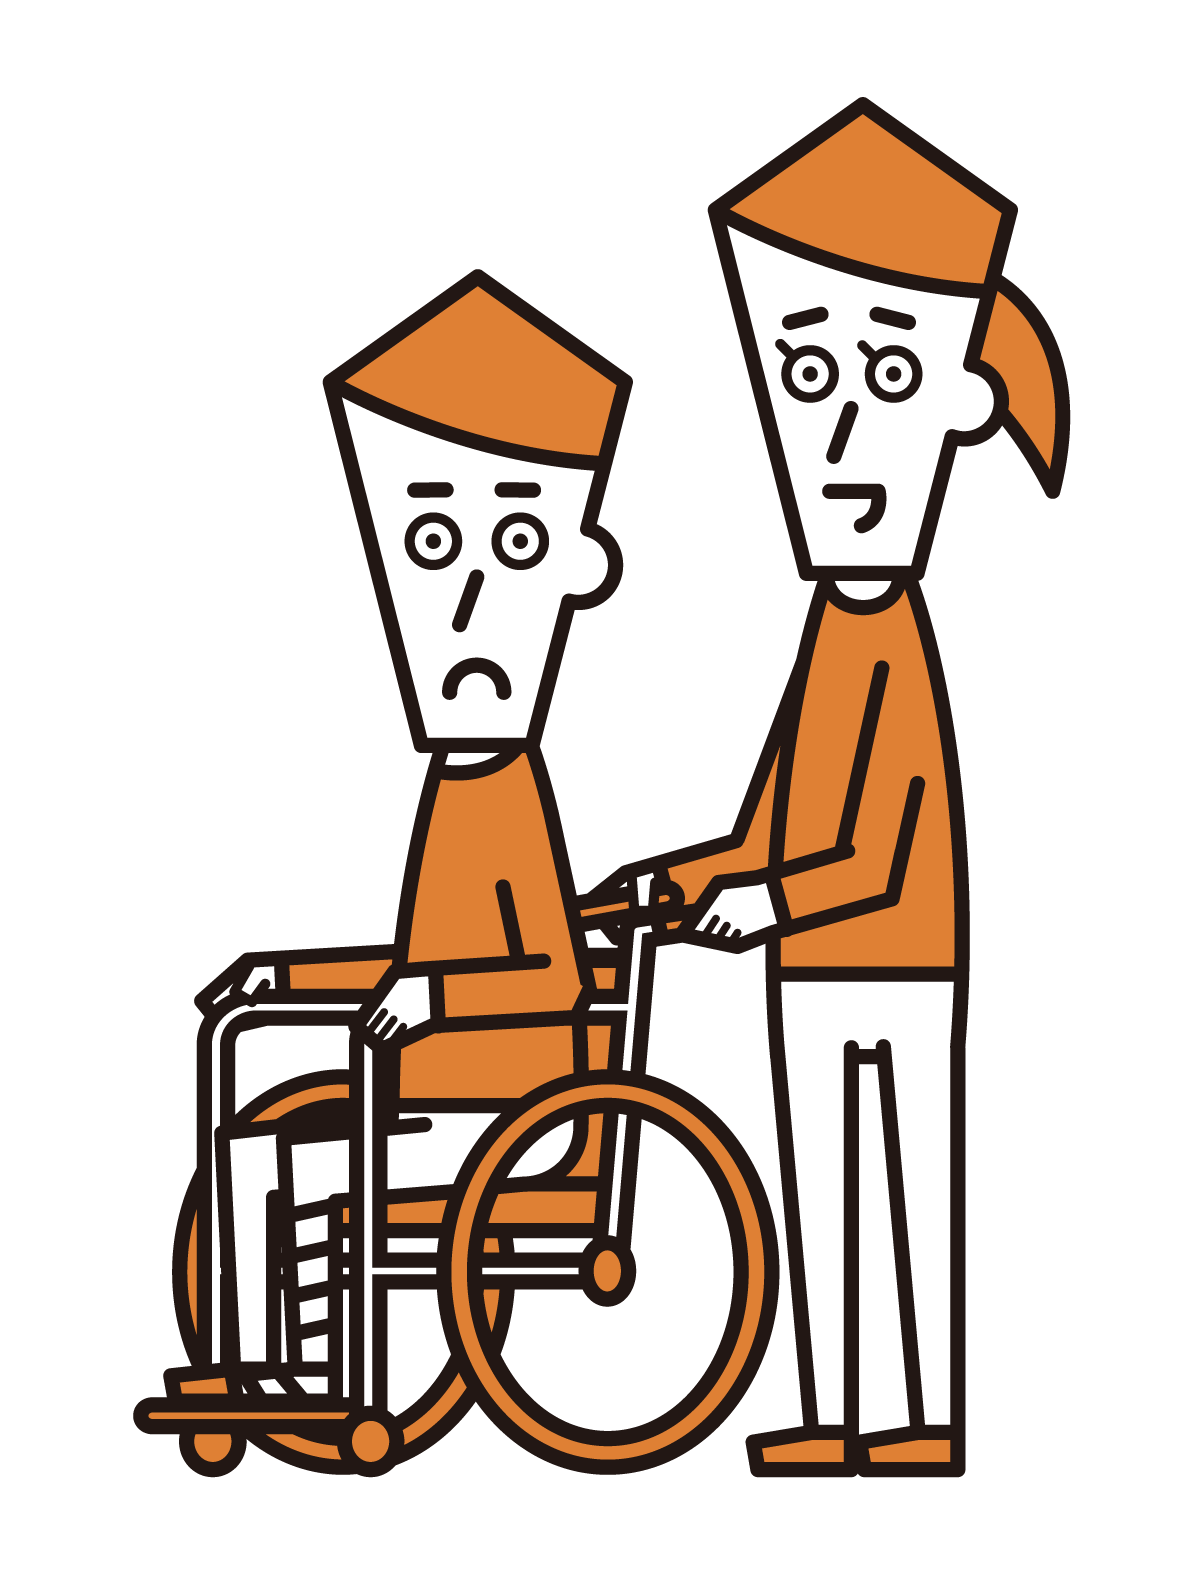 Illustration of a man in a wheelchair with a broken leg